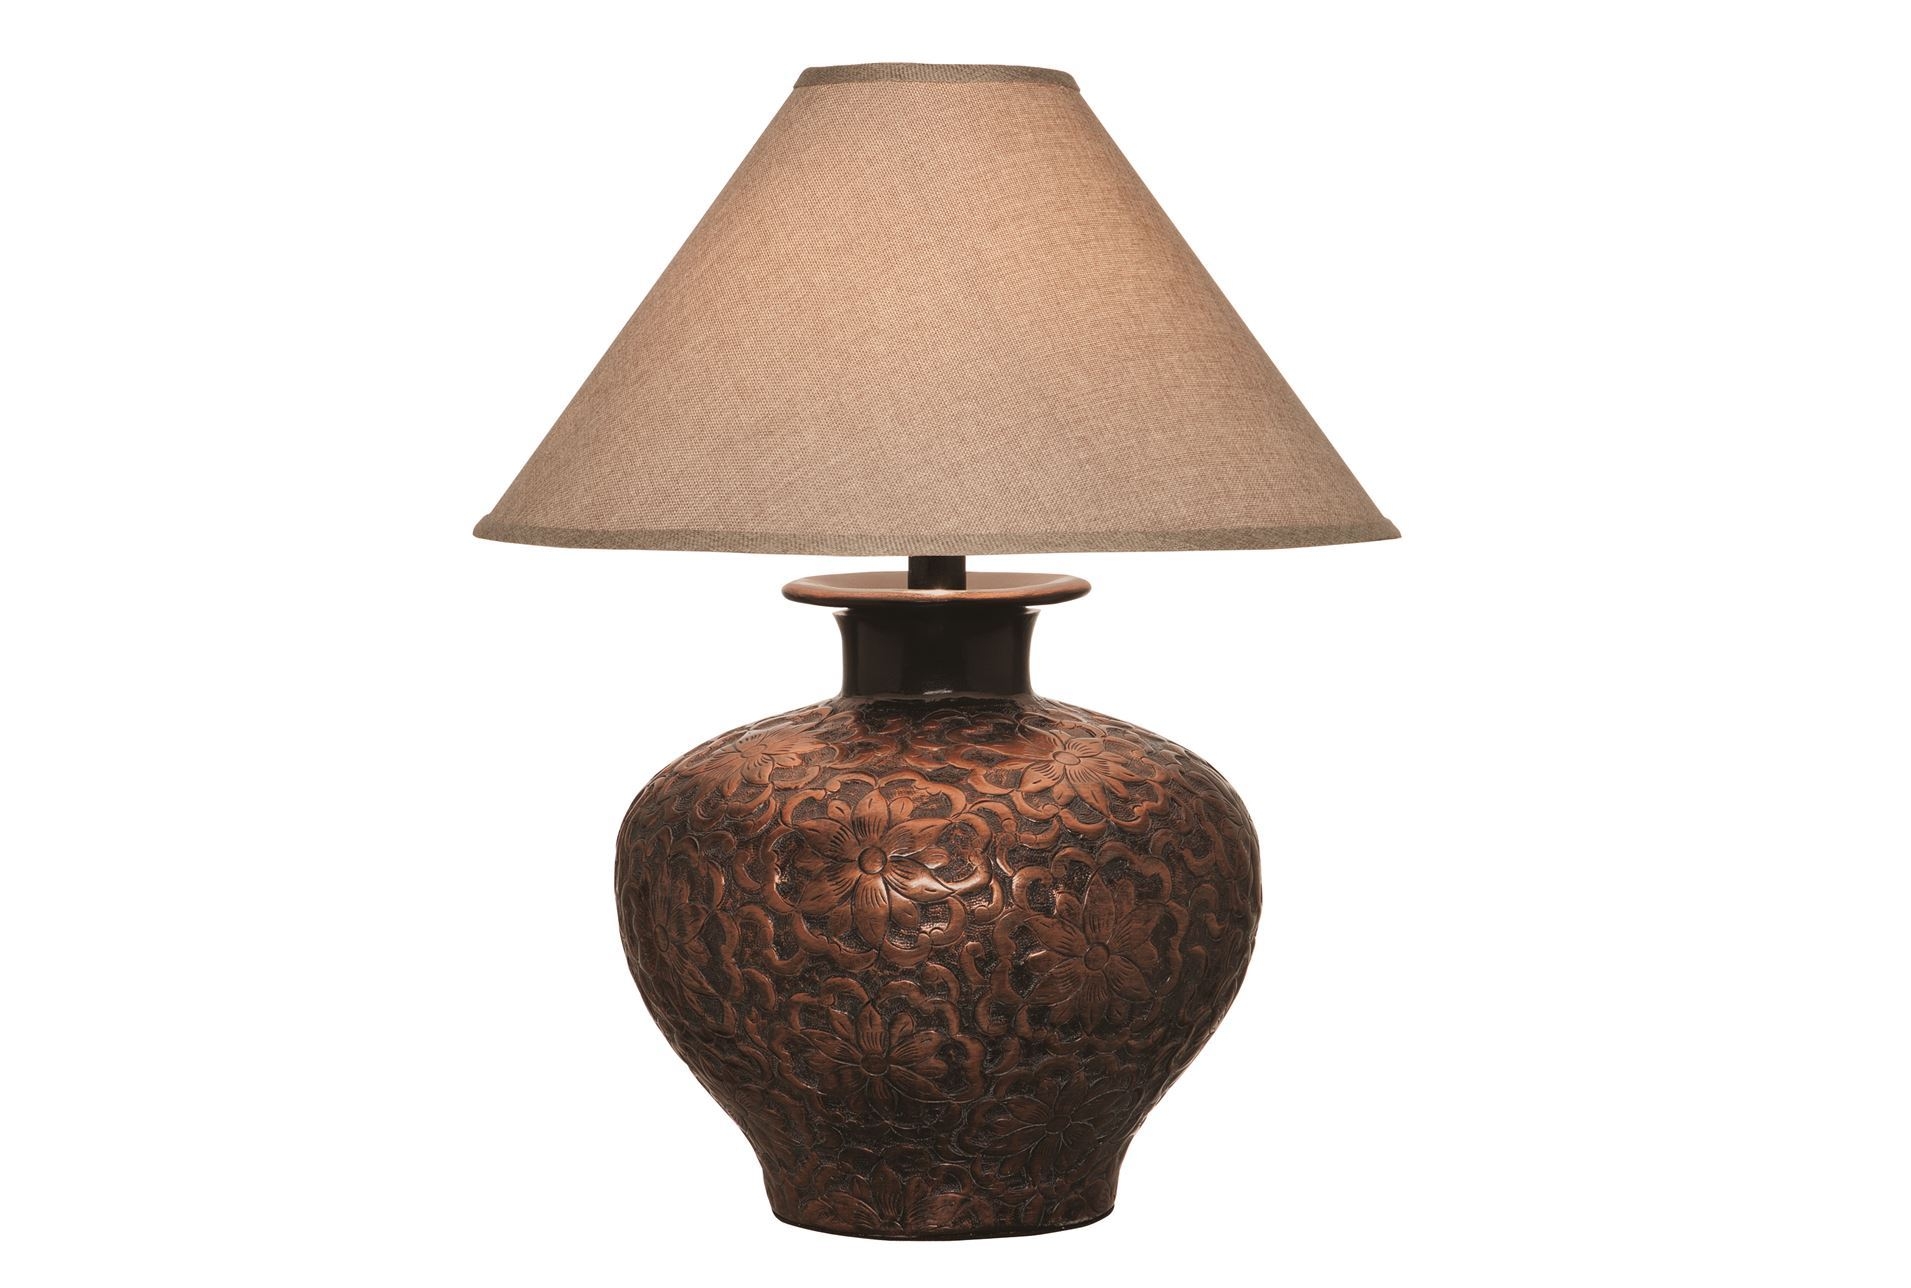 Hammered Copper Lamps - Ideas on Foter